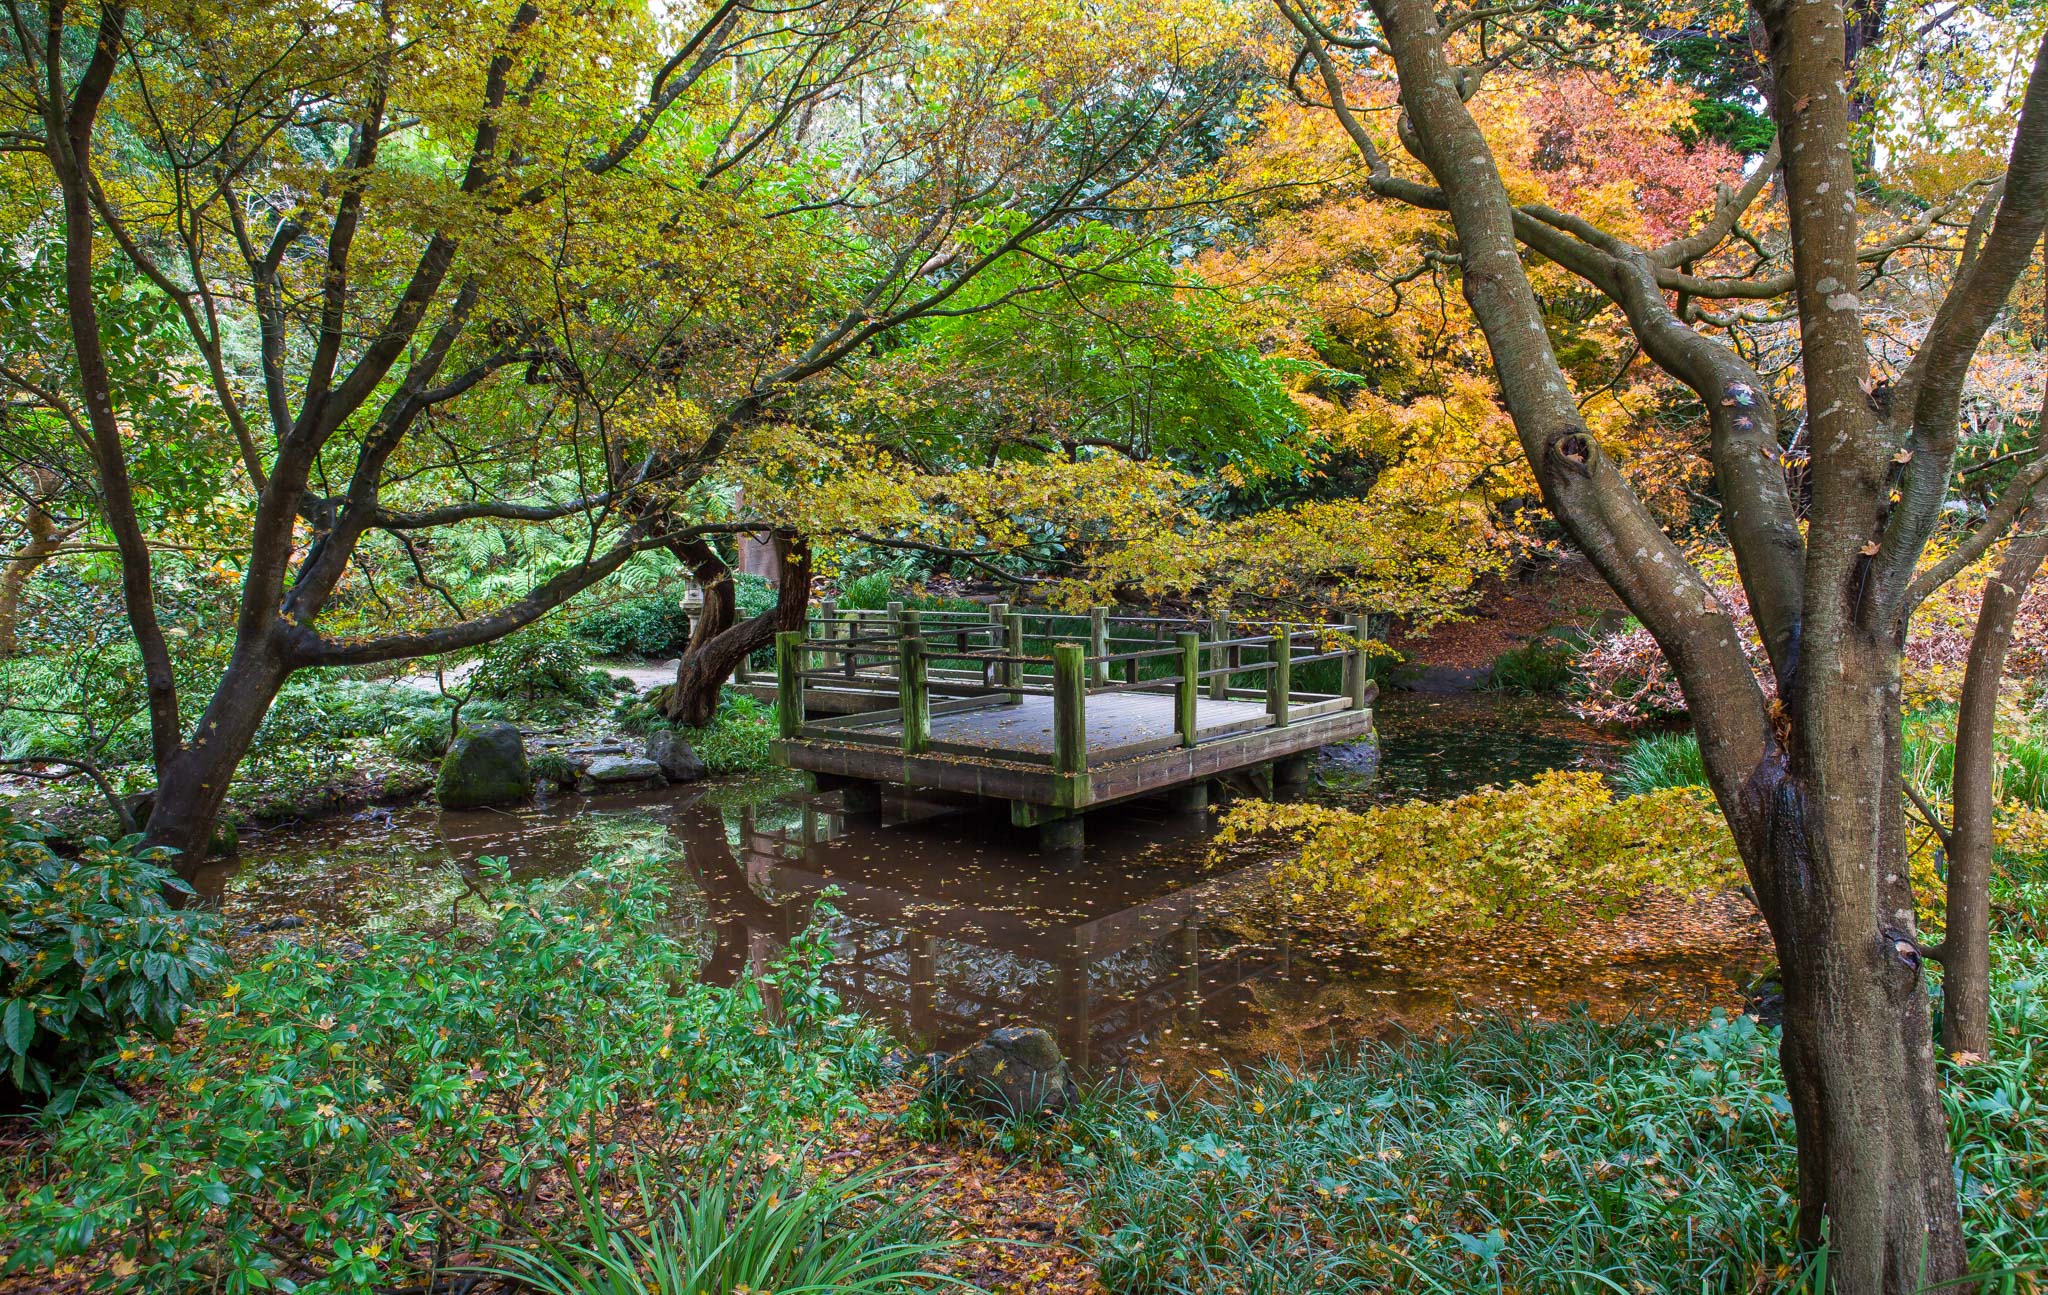 Platform viewing deck over pond in Moon Viewing Garden in San Francisco Botanical Garden with fall foliage color in Japanese Maple trees